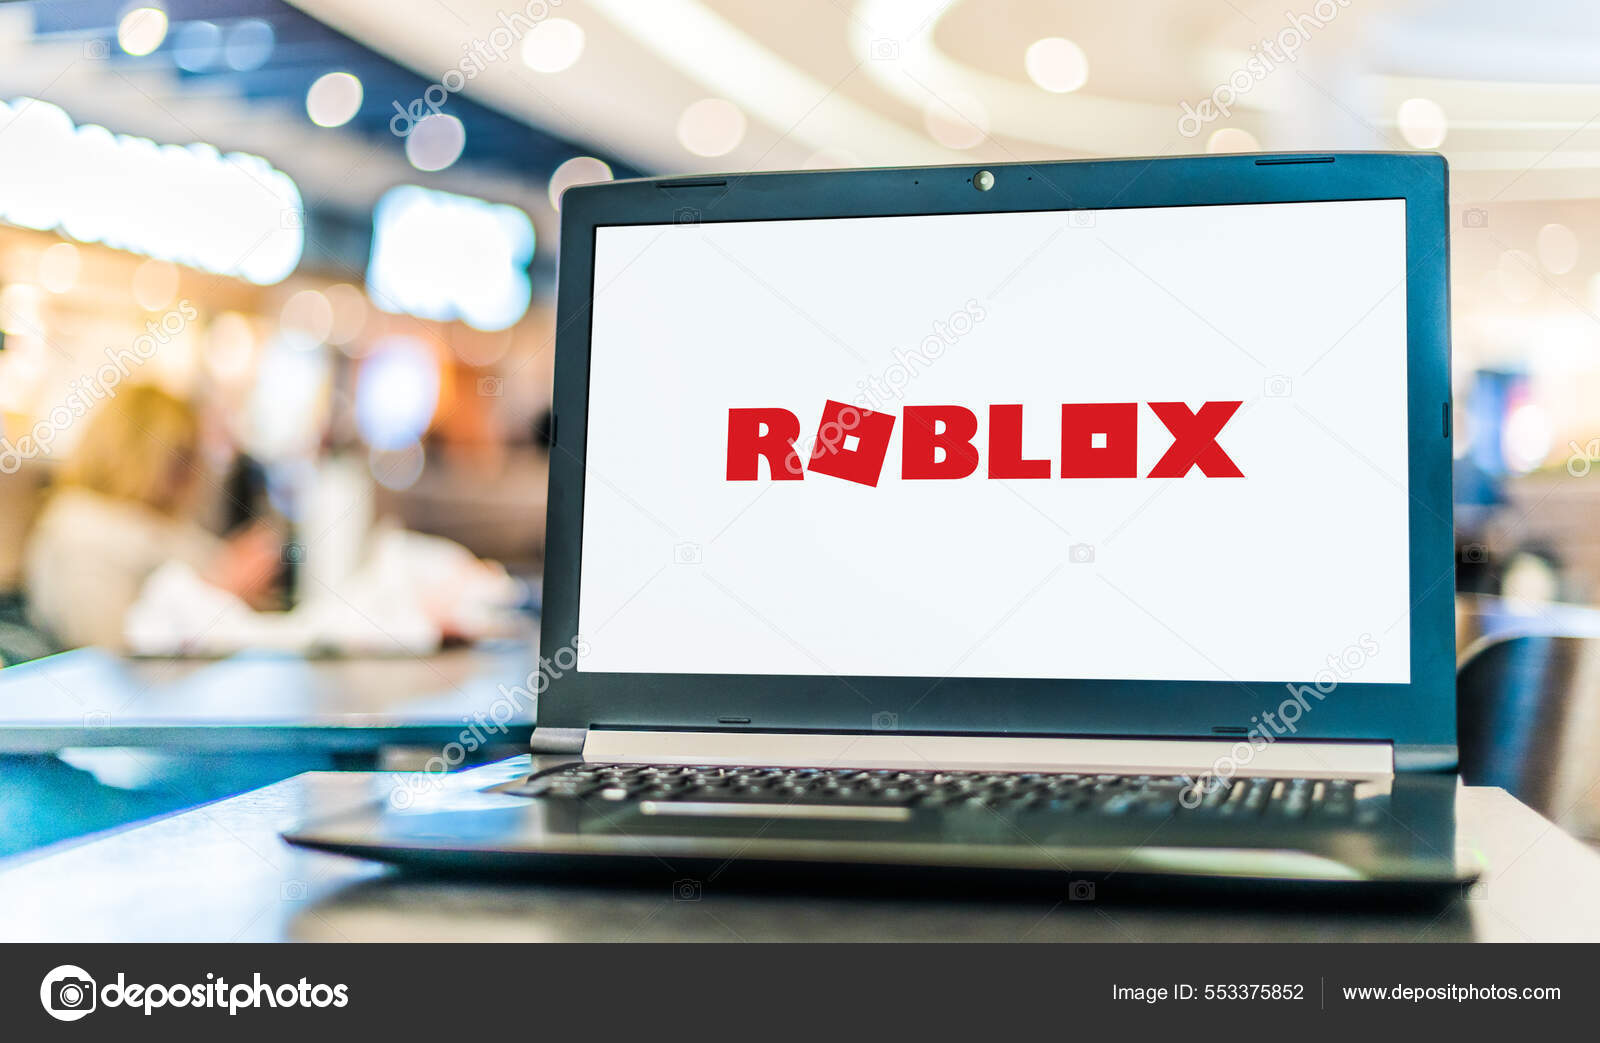 Roblox is an online game platform and game creation system